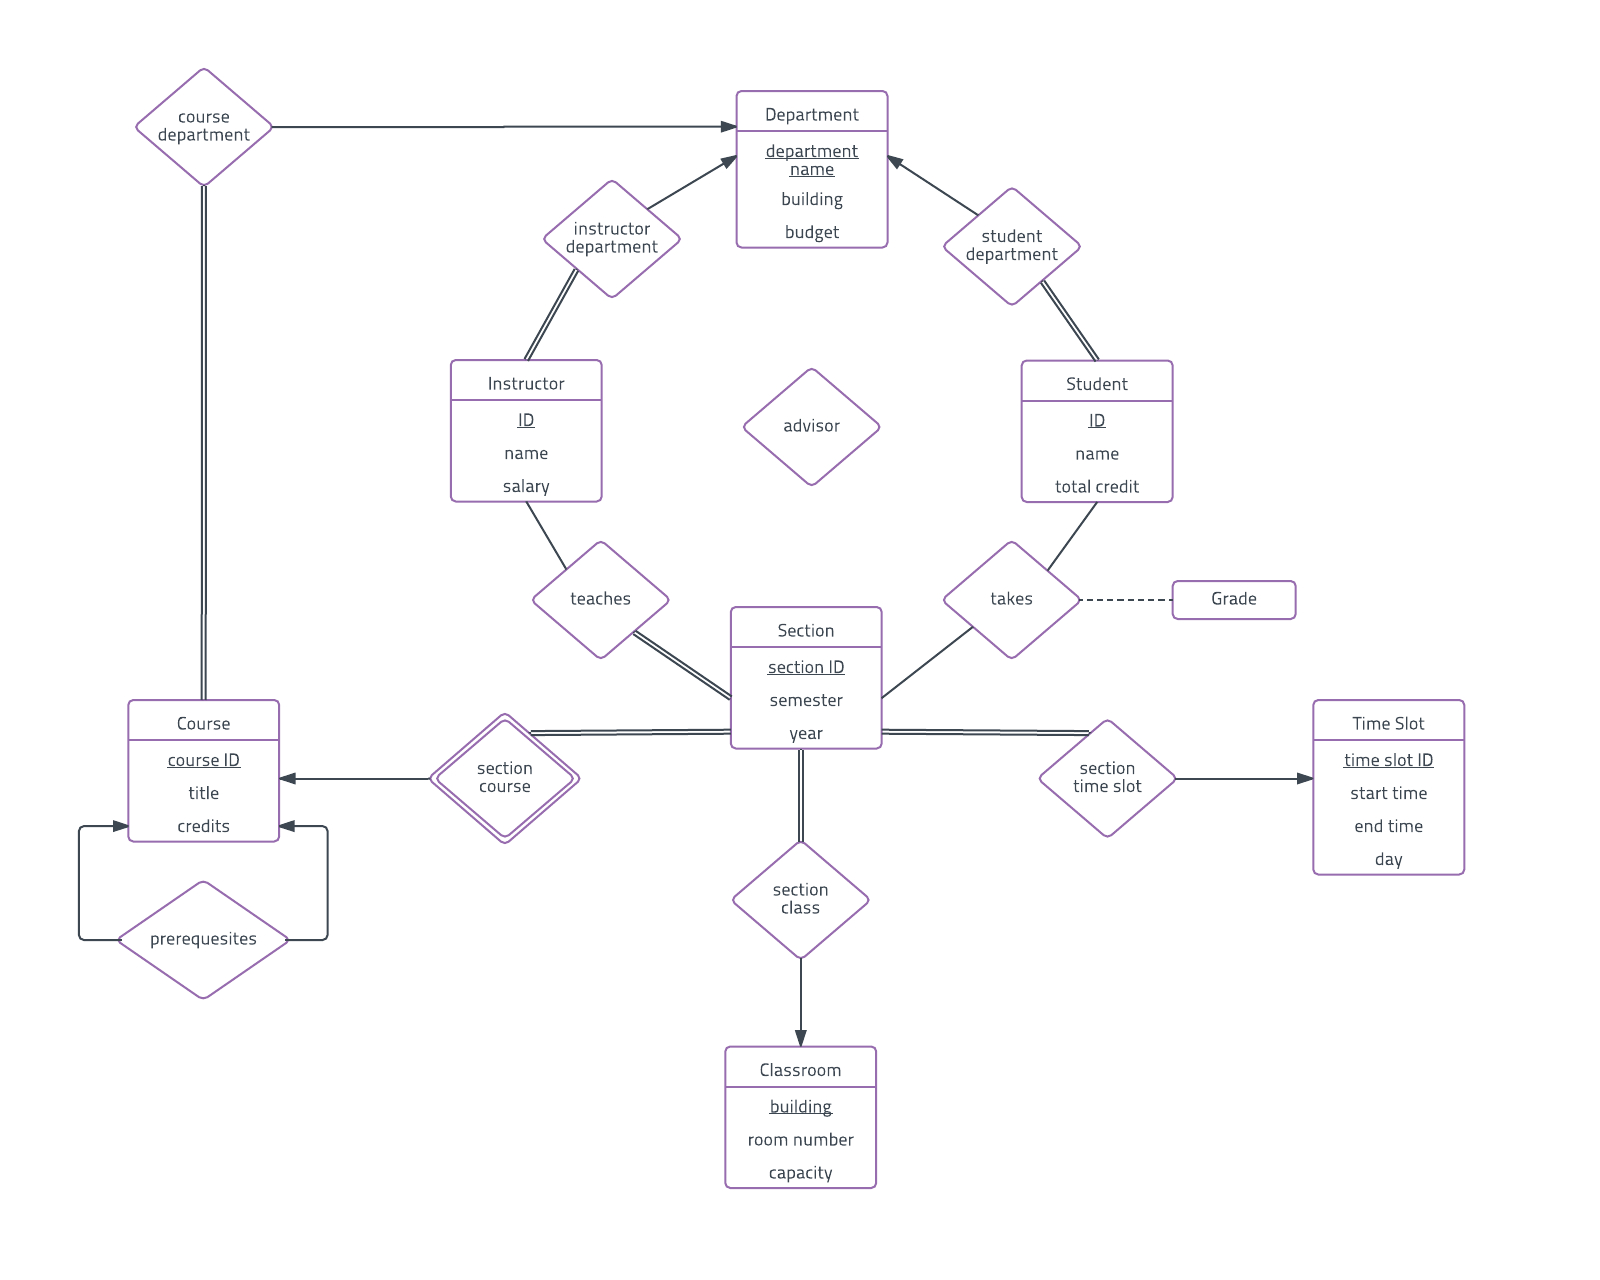 Er Diagram Examples And Templates | Lucidchart intended for Explain Er Model With Example